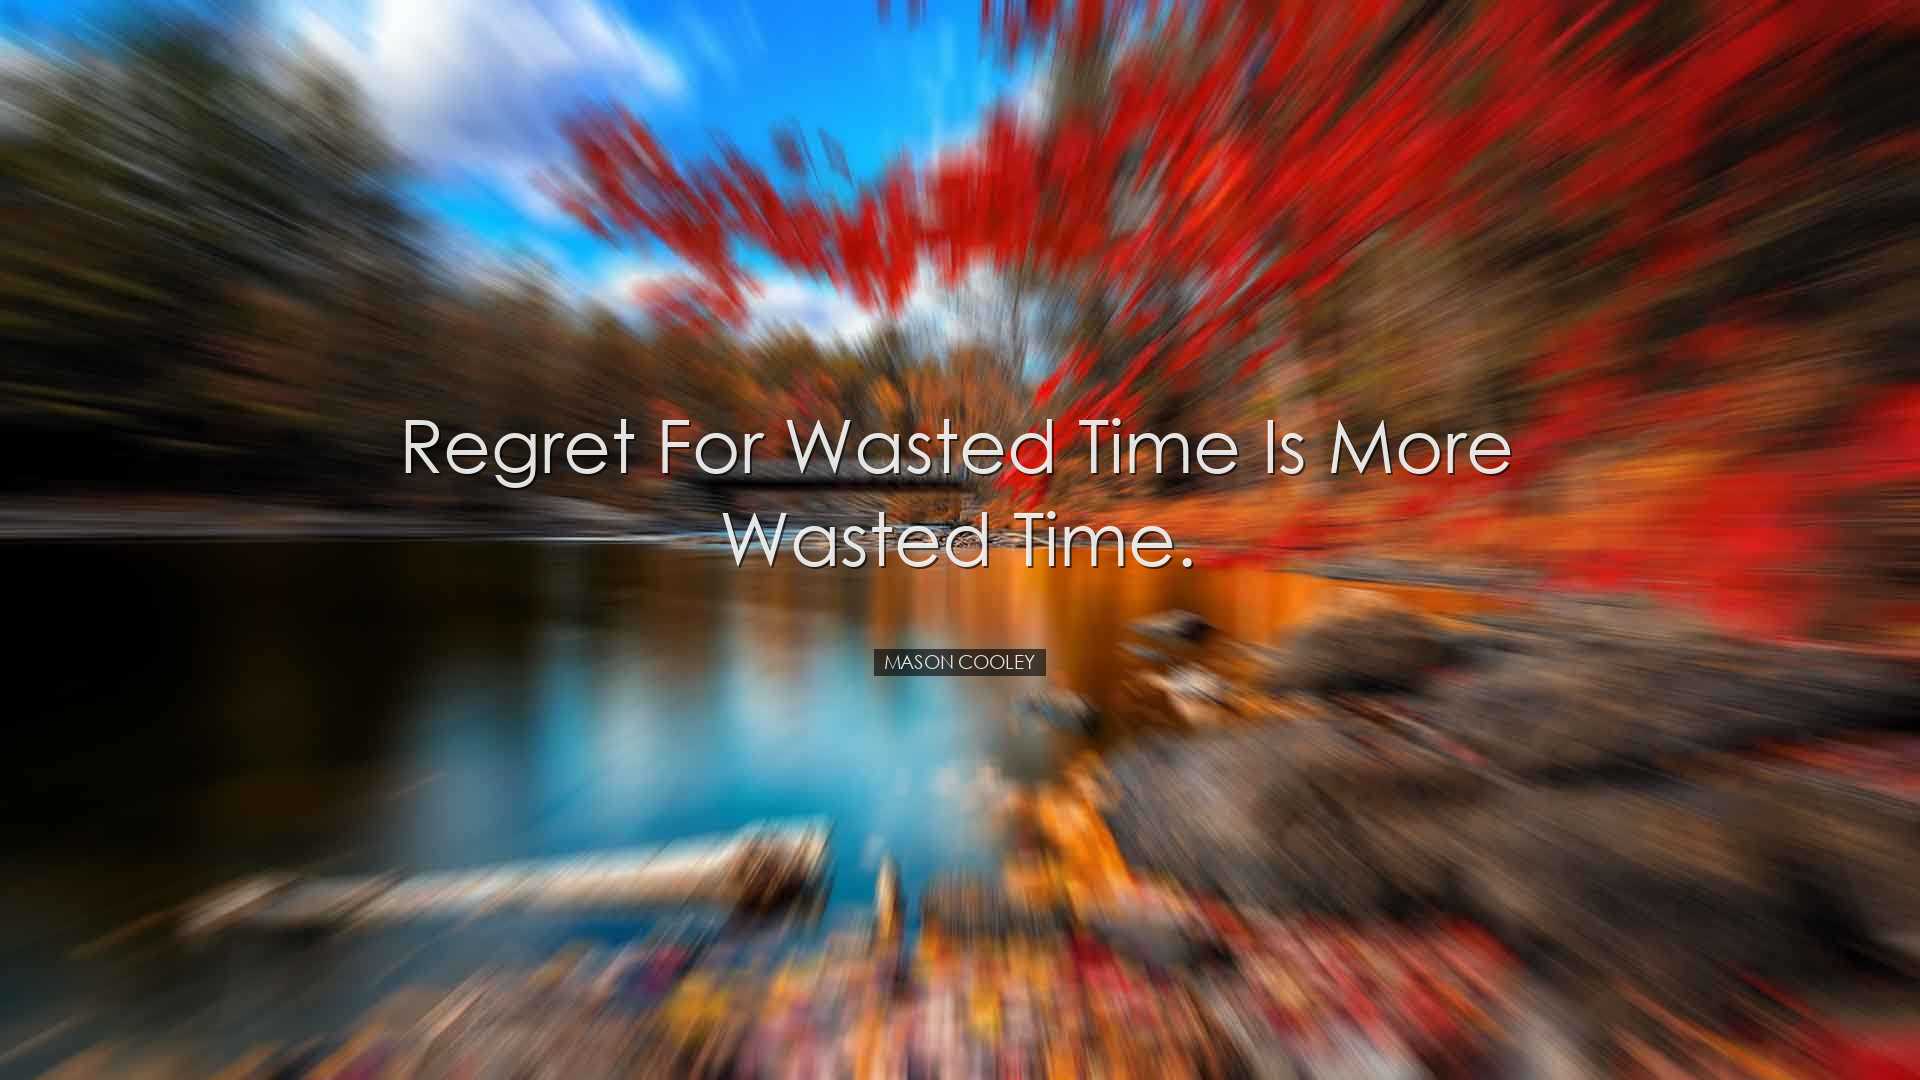 Regret for wasted time is more wasted time. - Mason Cooley